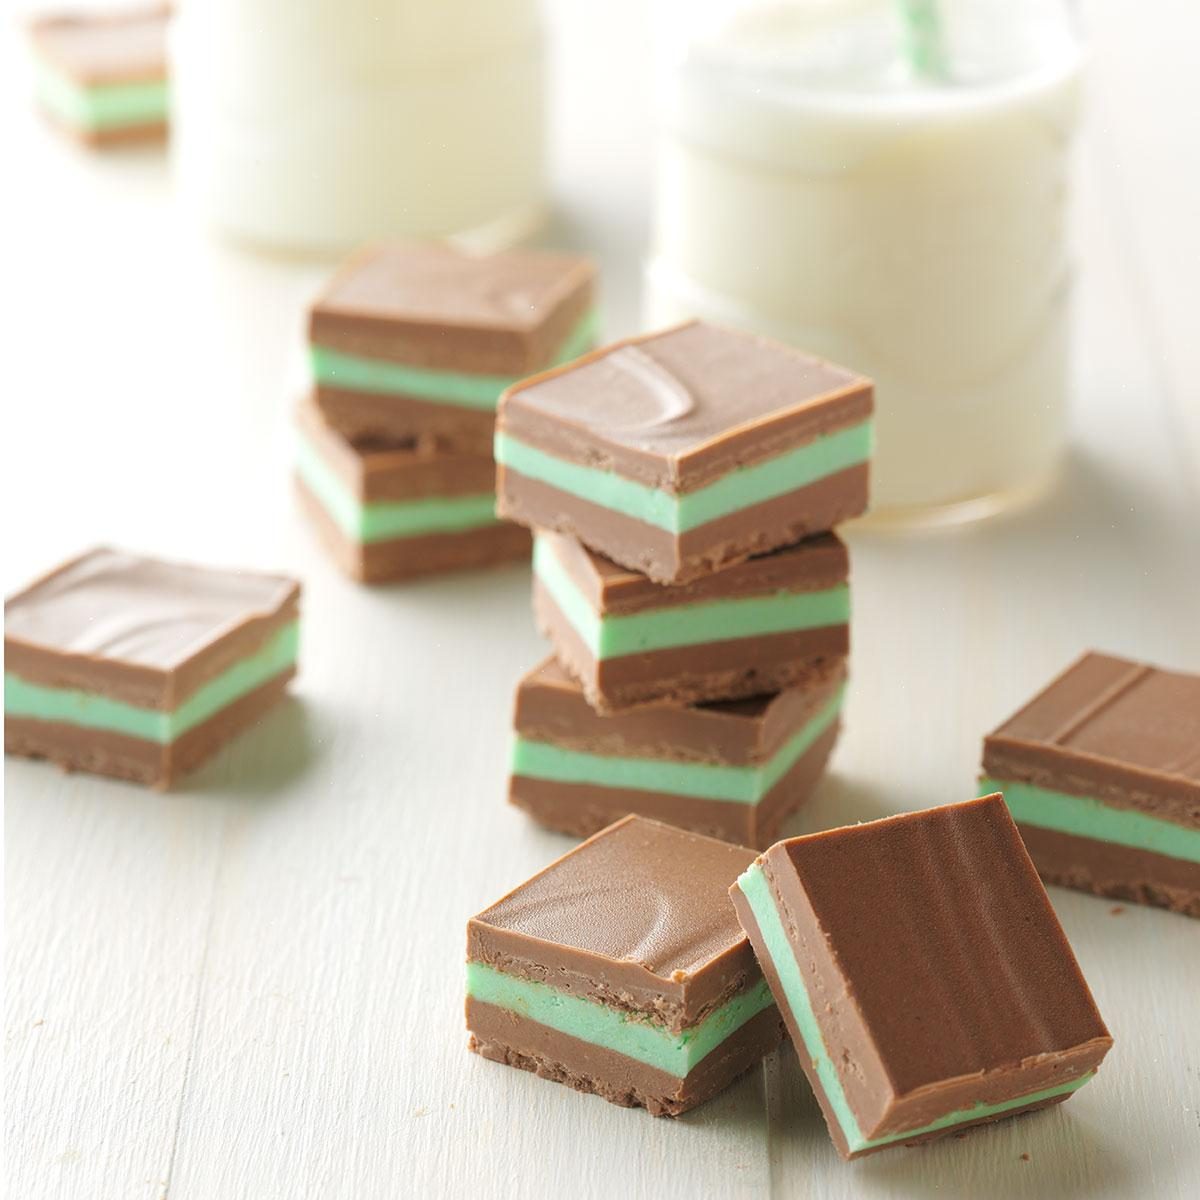 Layered Mint Candies Recipe: How to Make It